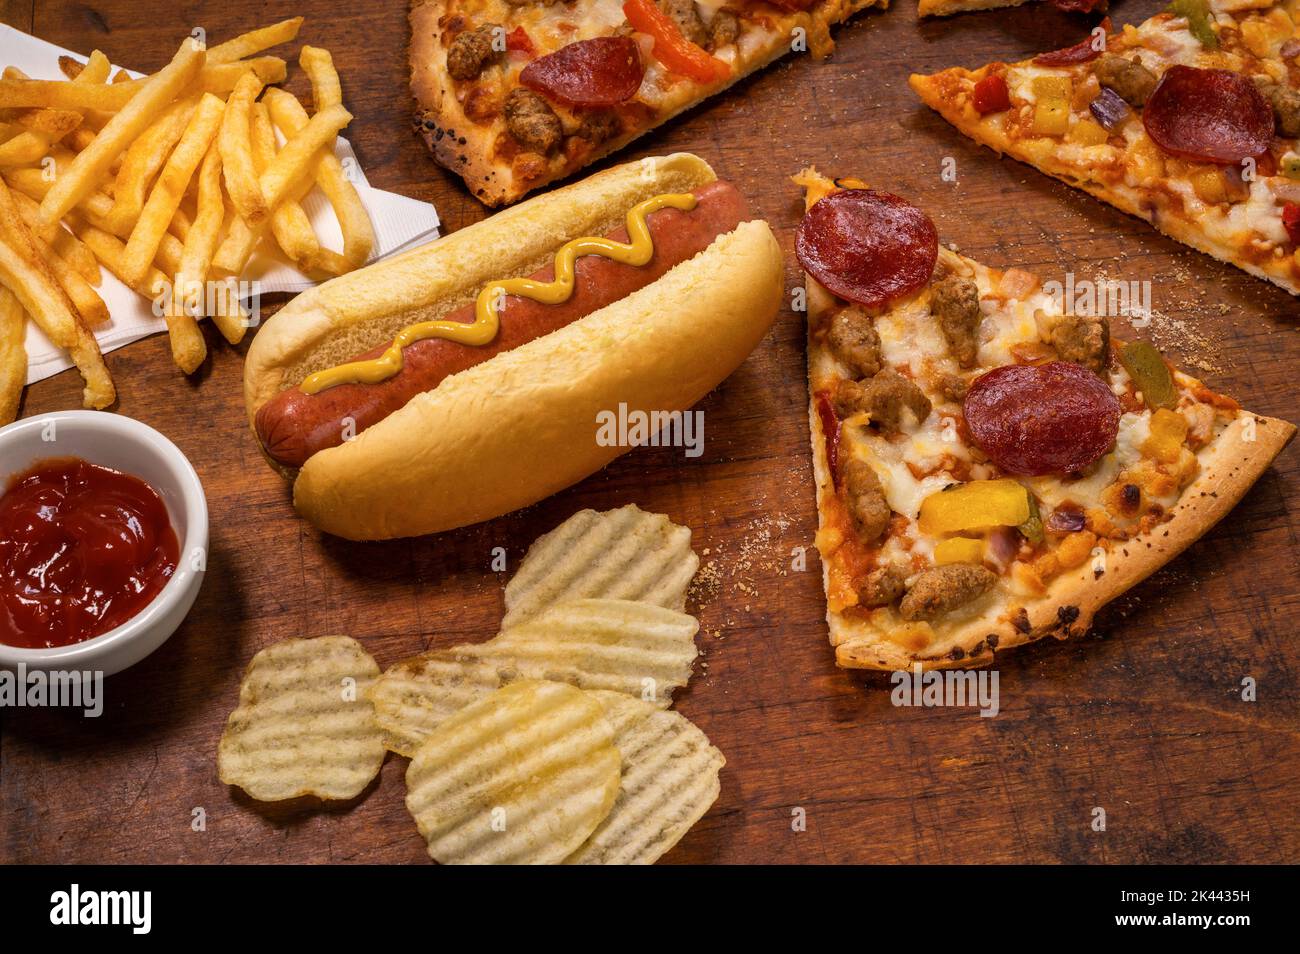 Variety of processed foods with pizza, hot dog, chips, and french fries Stock Photo